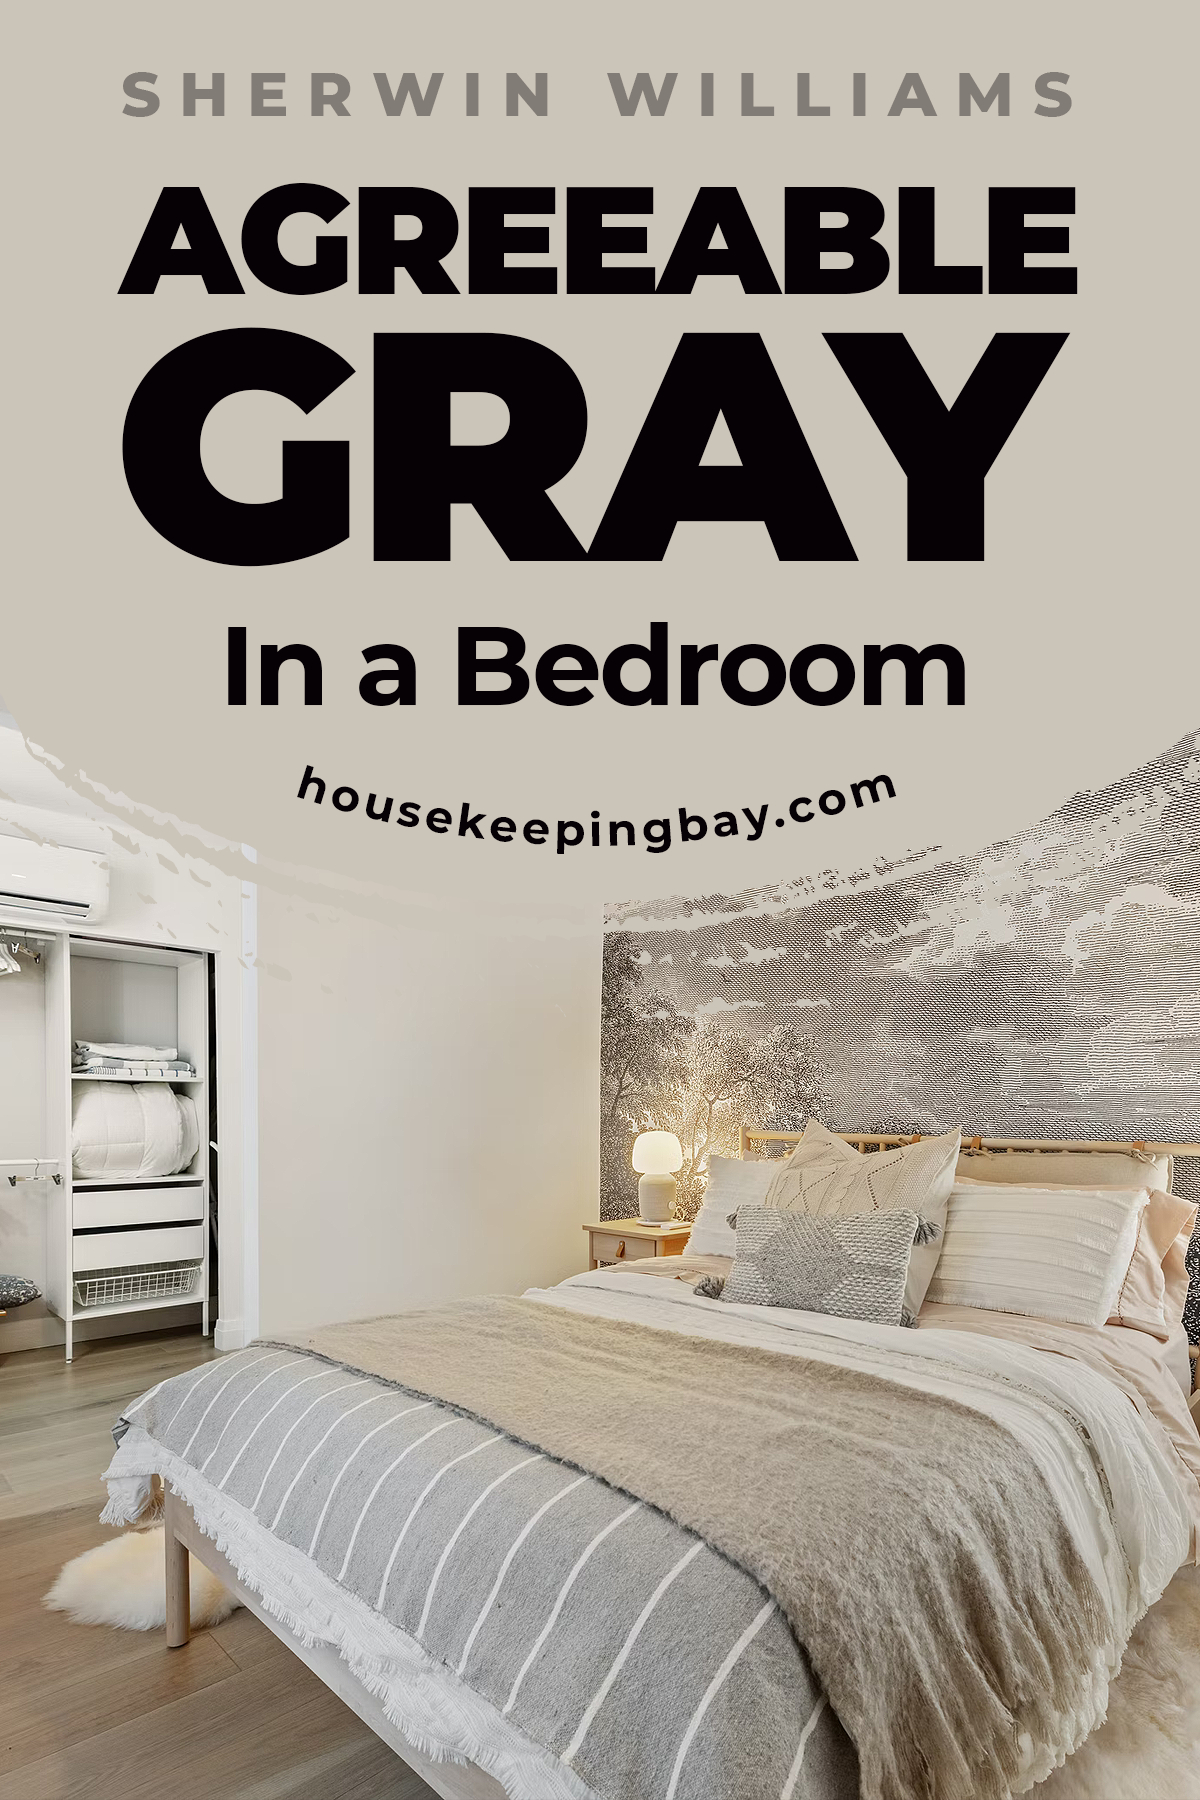 Agreeable Gray In a Bedroom